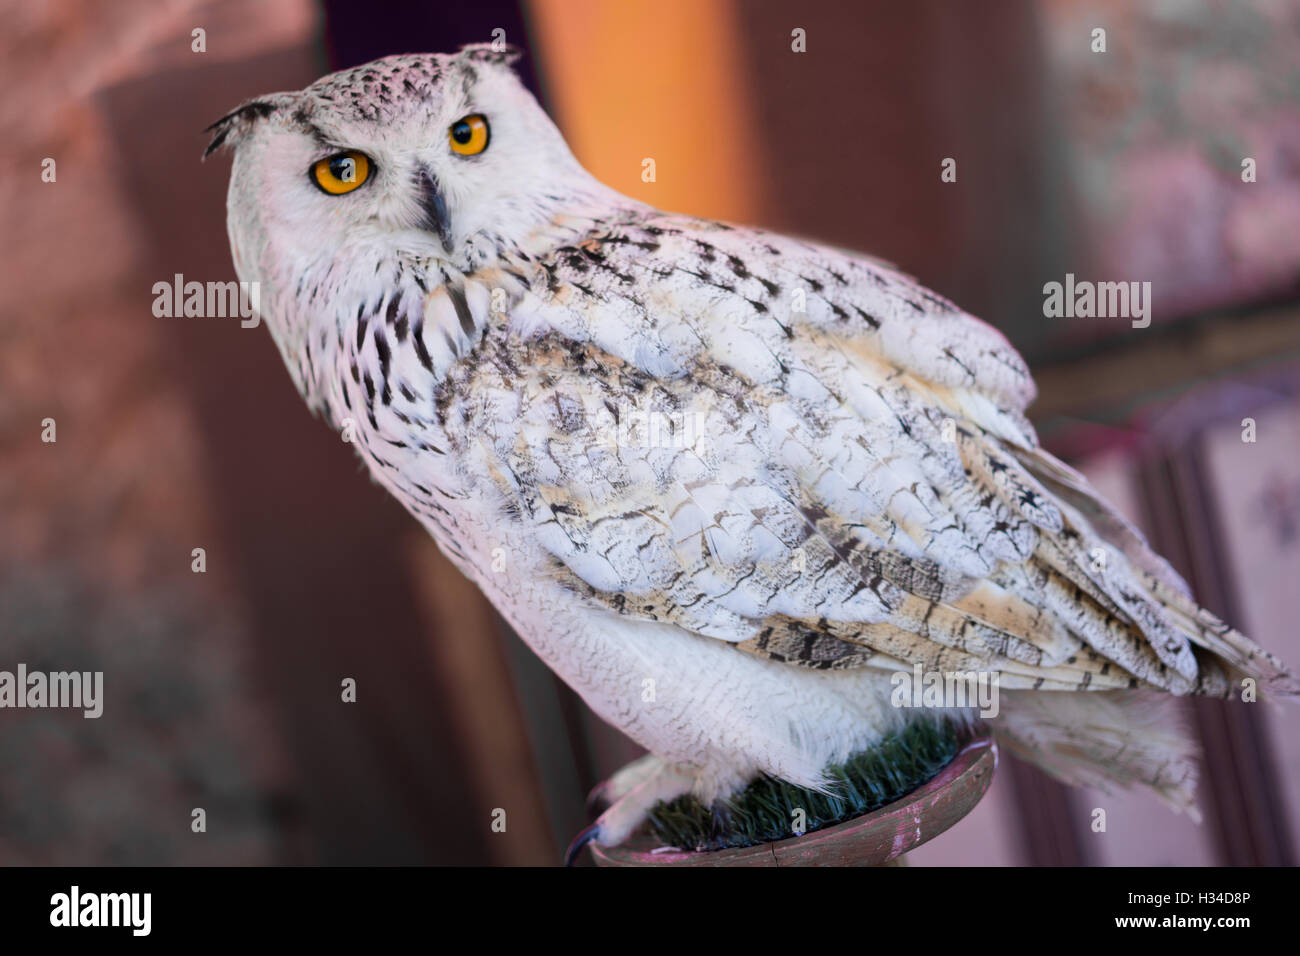 Great Horned Owl Stock Photo